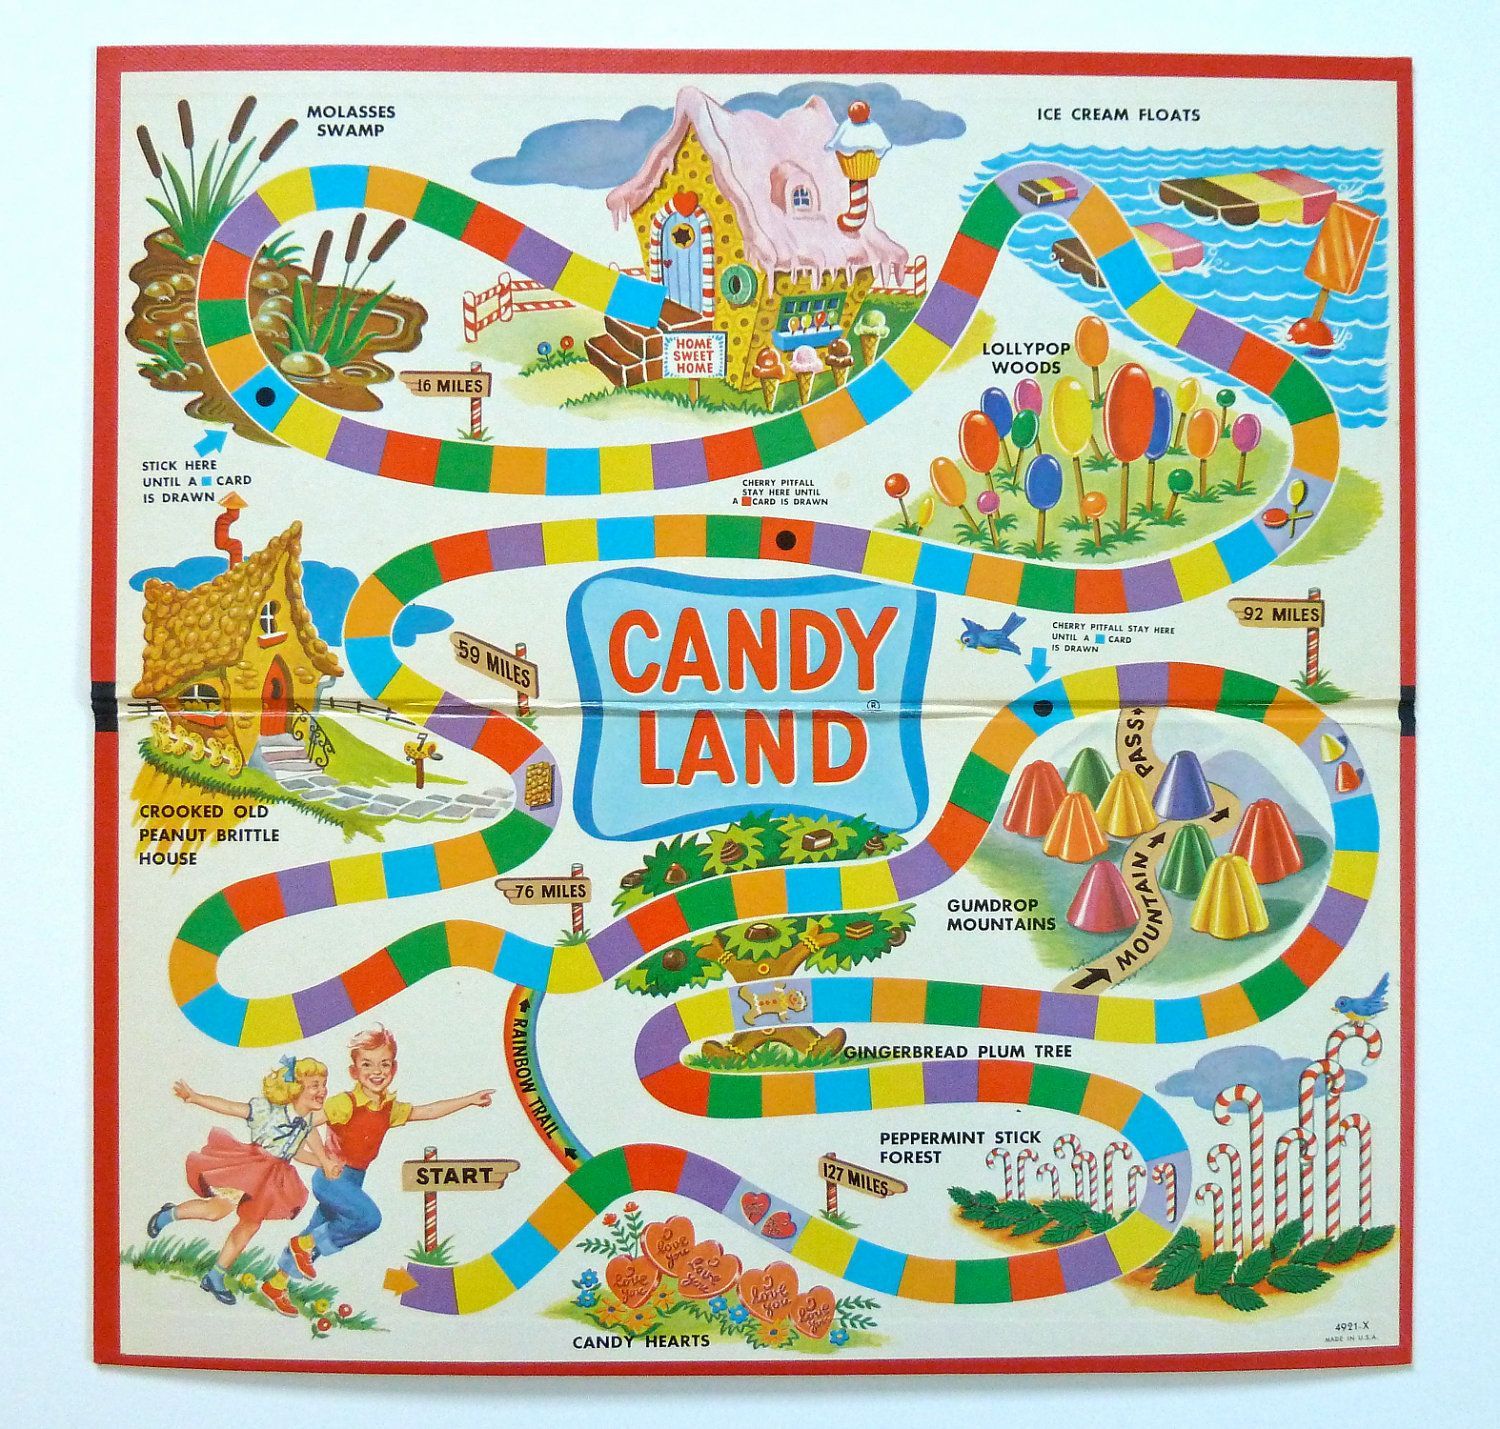 1960s Vintage Candy Land Game. When it first came out!! Still a favorite memory